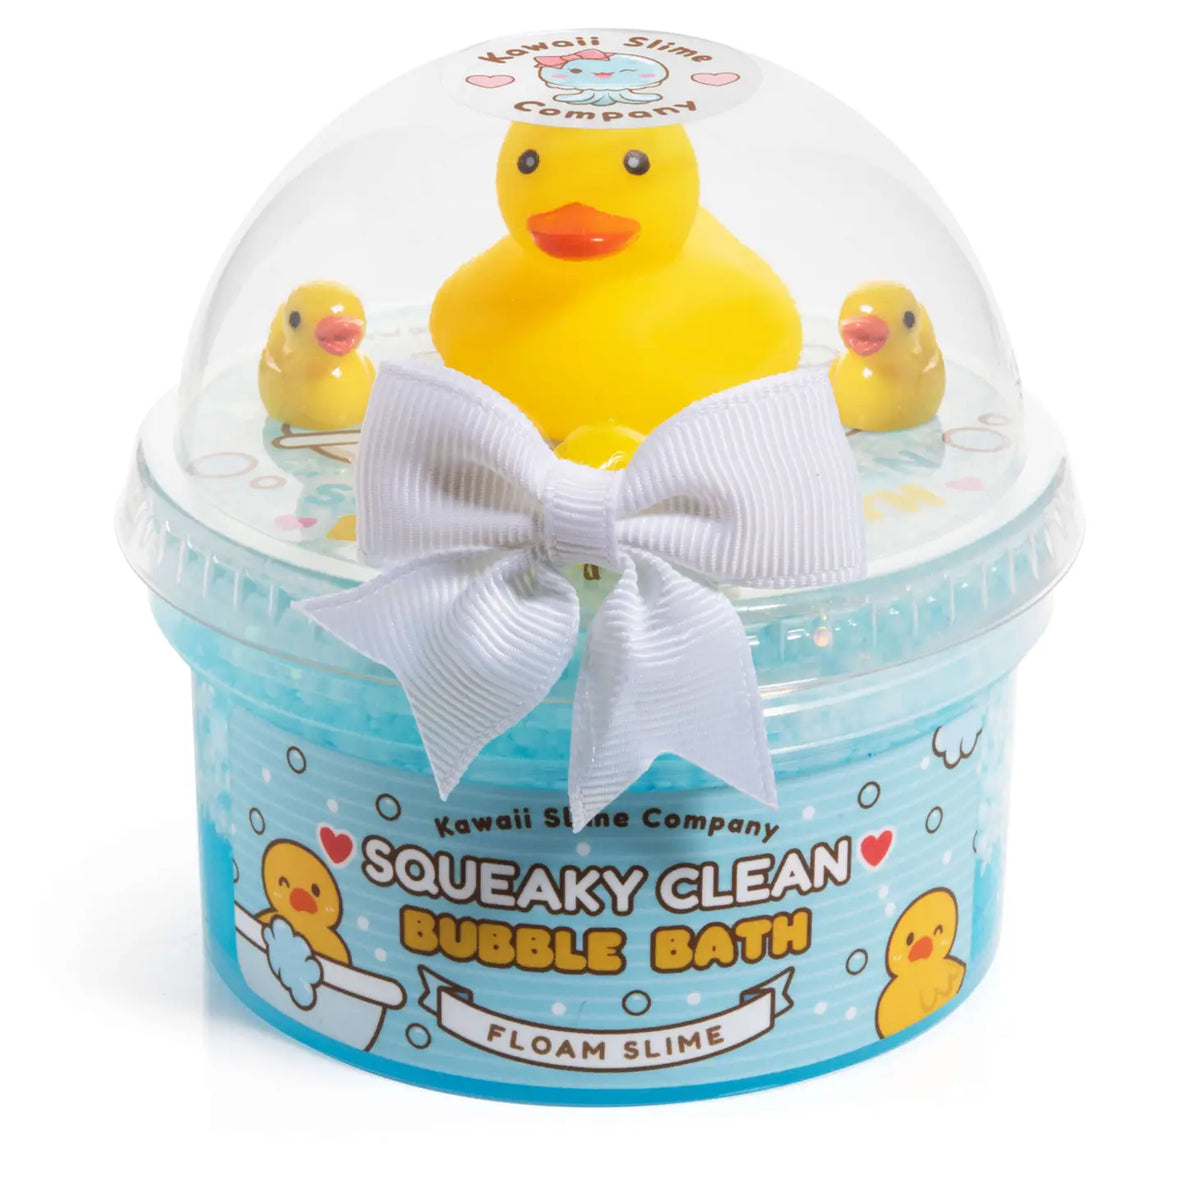 Squeaky Clean Bubble Bath Floam Slime Cover